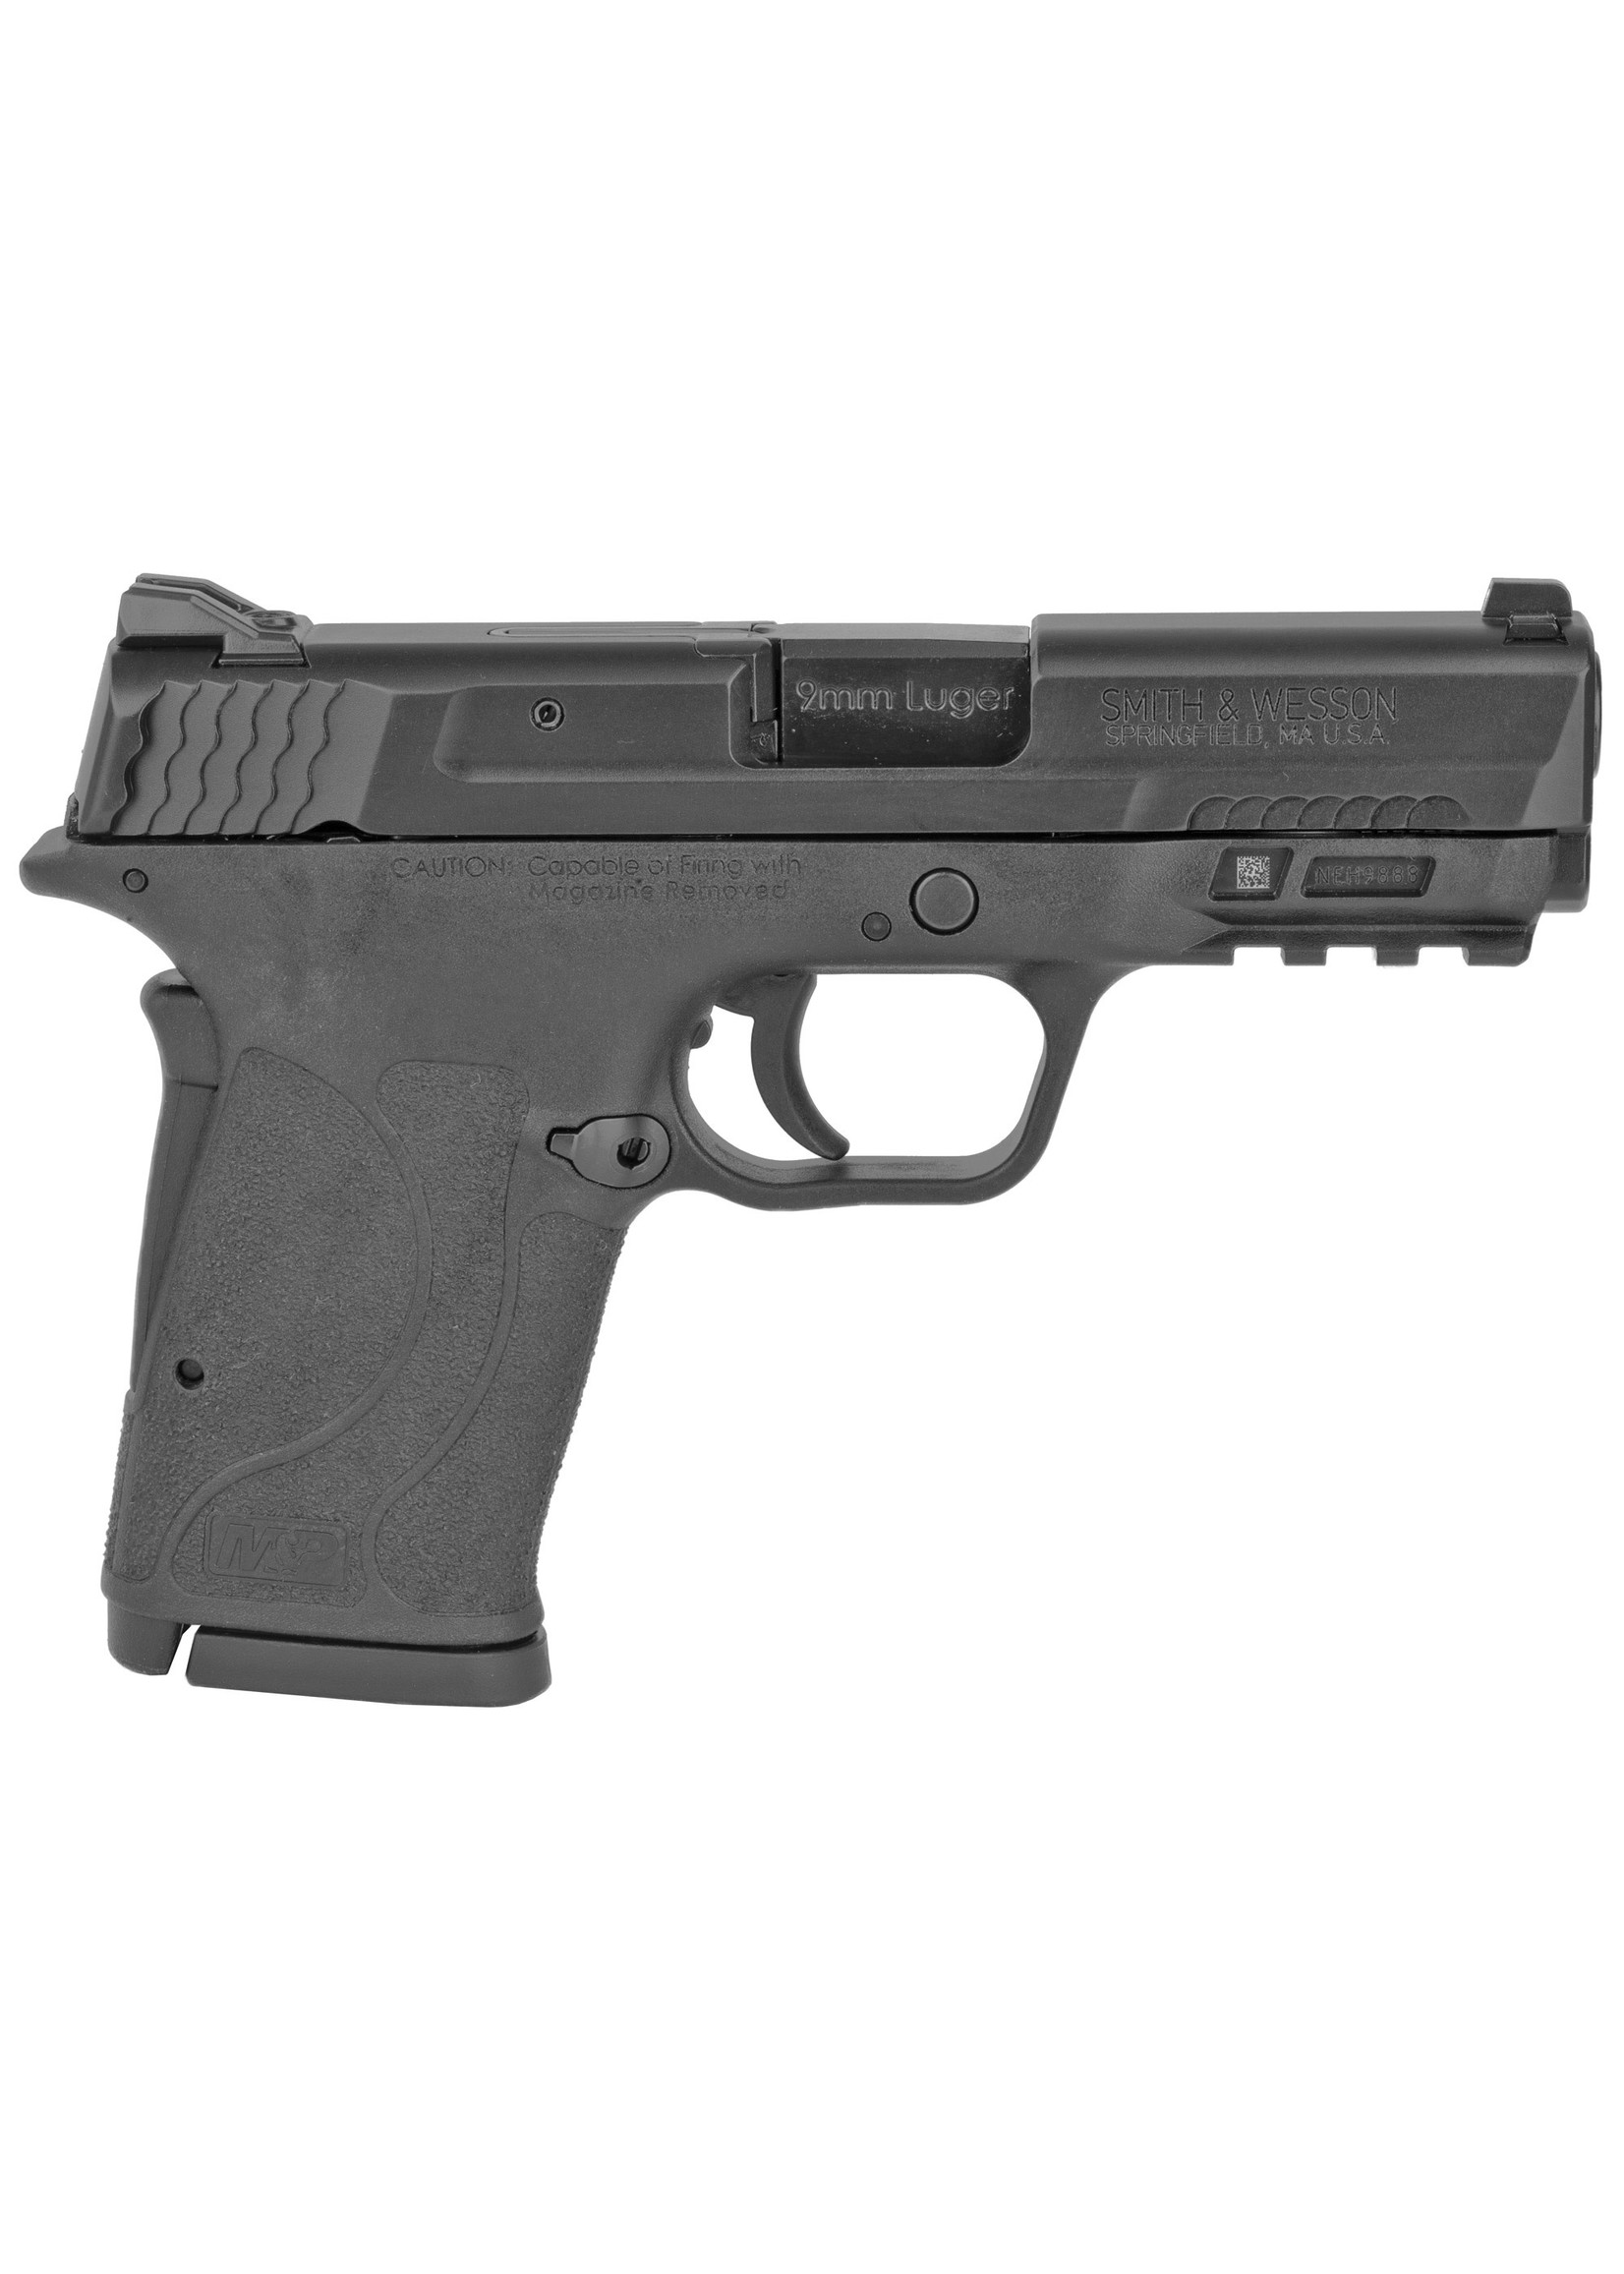 Smith and Wesson (S&W) Smith & Wesson, M&P9 SHIELD EZ M2.0, Internal Hammer Fired, Semi-automatic, Polymer Frame Pistol, Micro-Compact, 9MM, 3.68" Barrel, Armornite Finish, Black, 3-Dot Sights, 8 Rounds, 2 Magazines